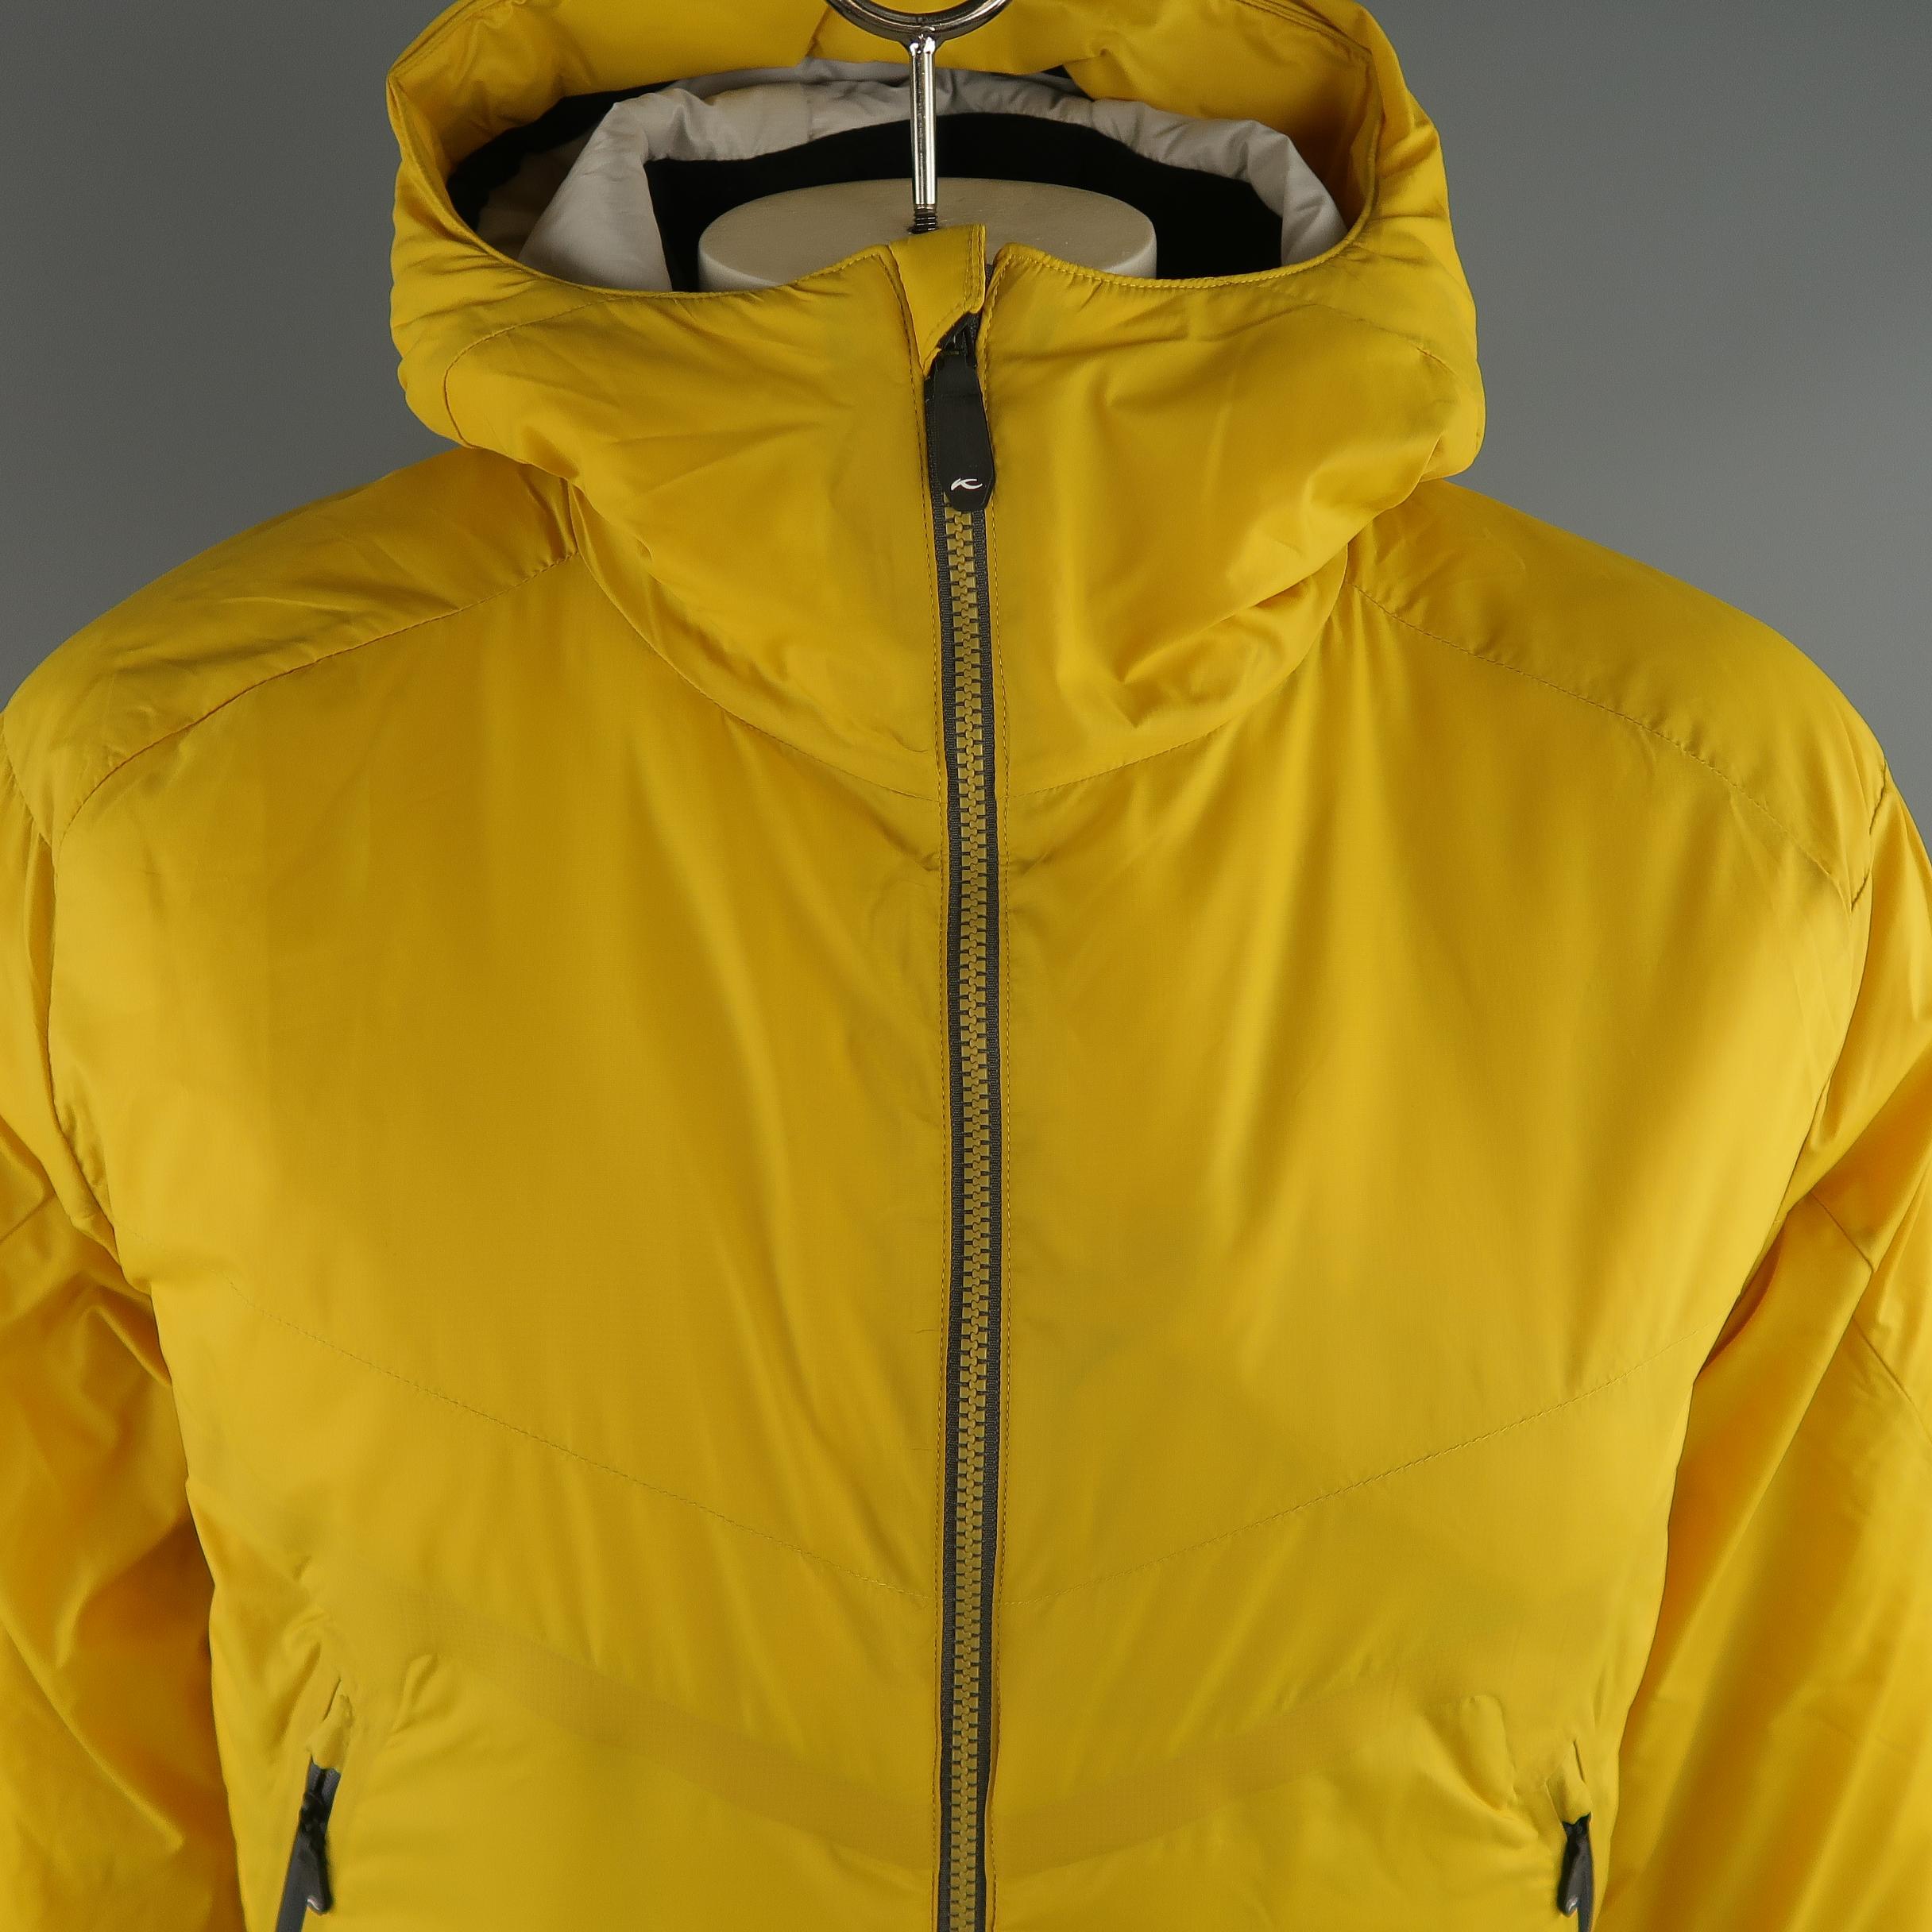 KJUS  filled hooded  jacket comes in a light weight yellow tone in polyamide solid material, zip up, slit pockets. Made in Italy.
 
New with Tags.
Marked: 52 / L  
 
Measurements:
 
Shoulder: 20 in.
Chest: 46 in.
Sleeve: 27 in.
Length: 30 in.